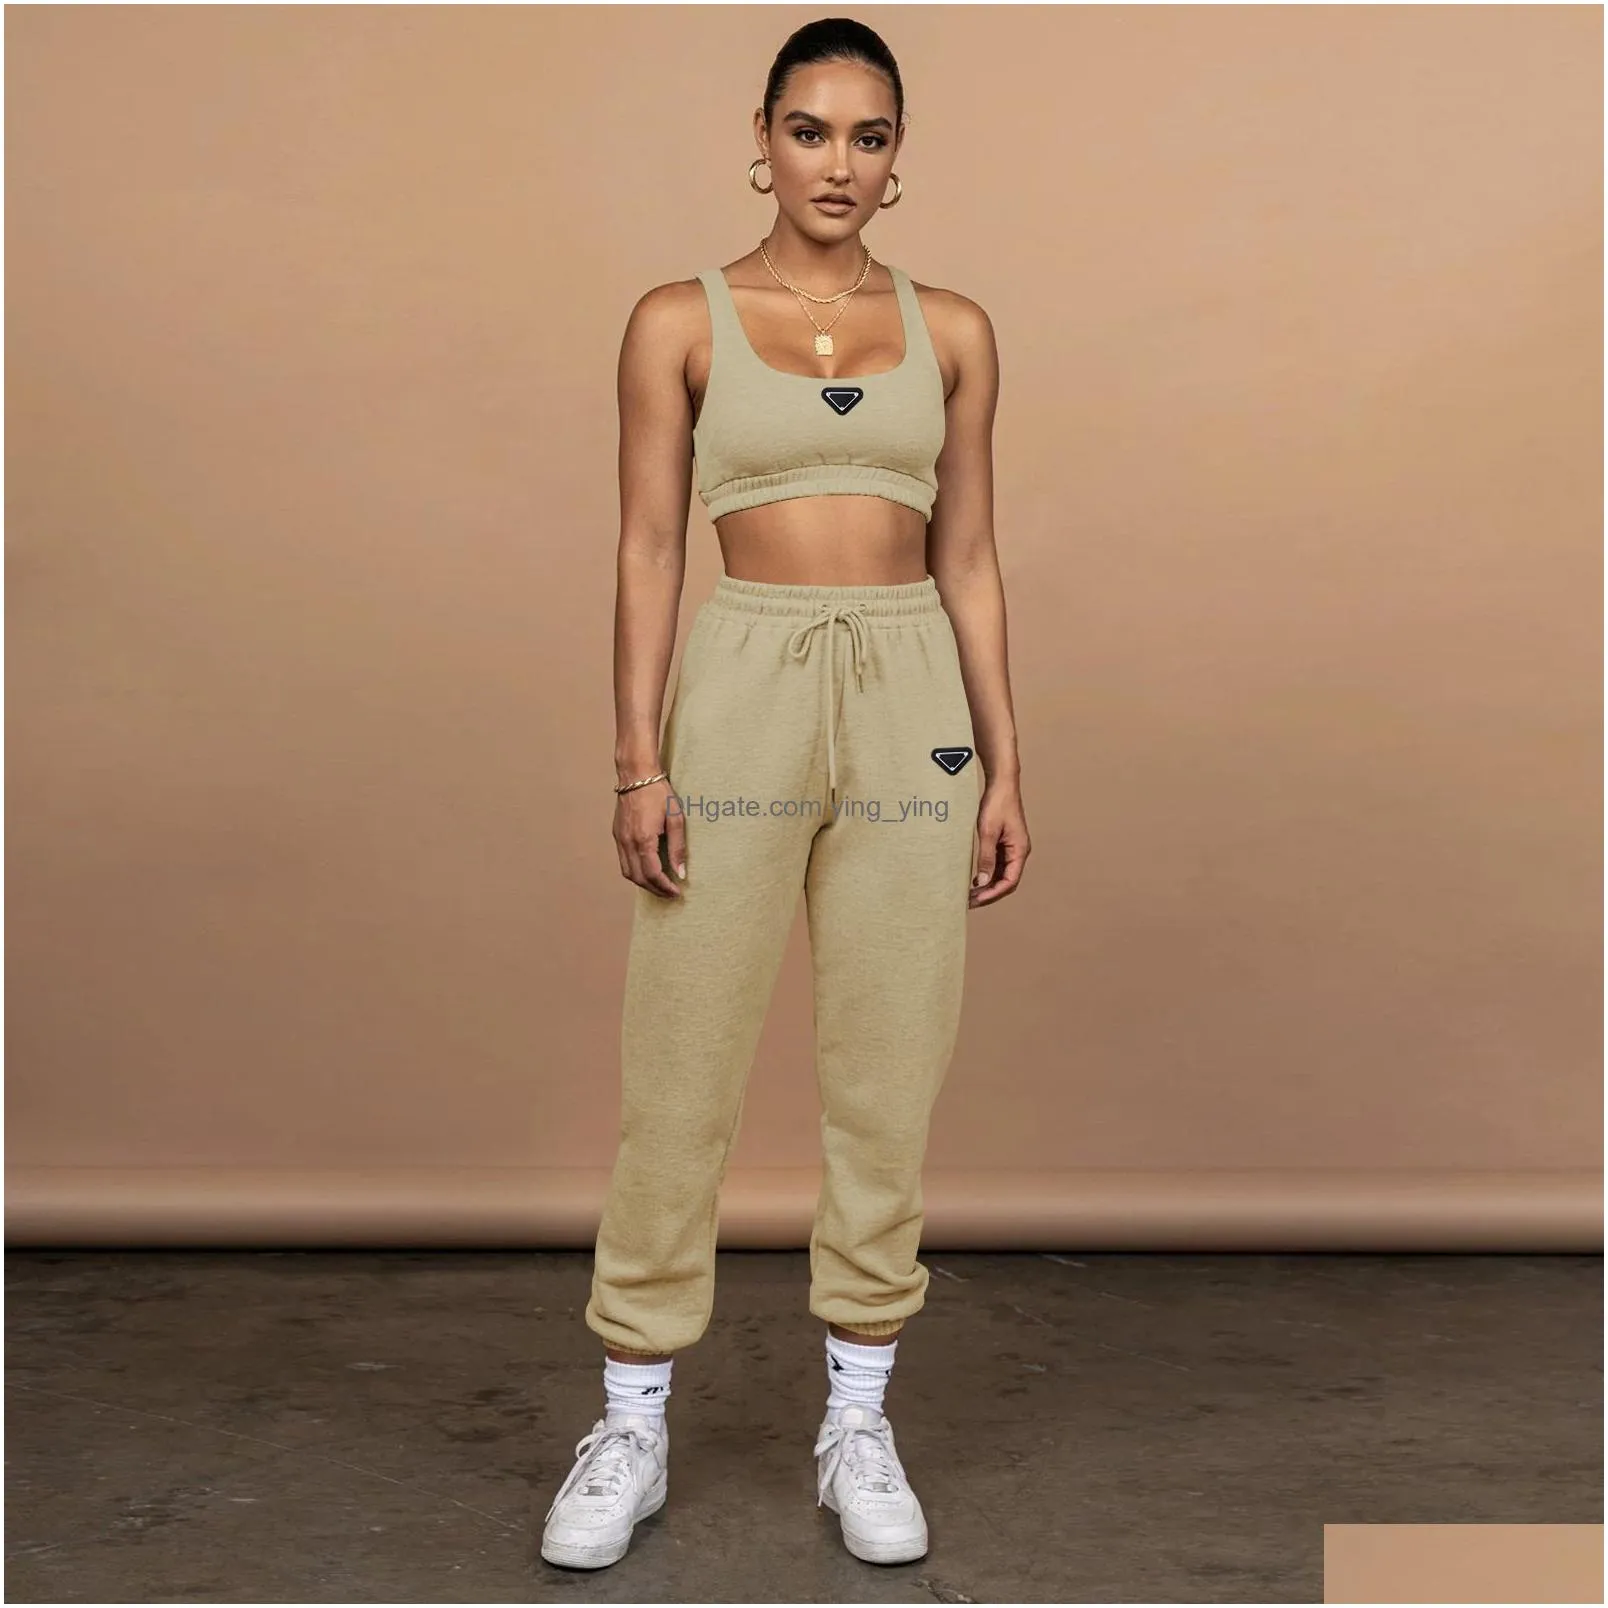 parada designer brand womens tracksuits womens navel-baring tank top tie-up trousers two-piece sports fitness running suit jogging clothes vest sweatpants